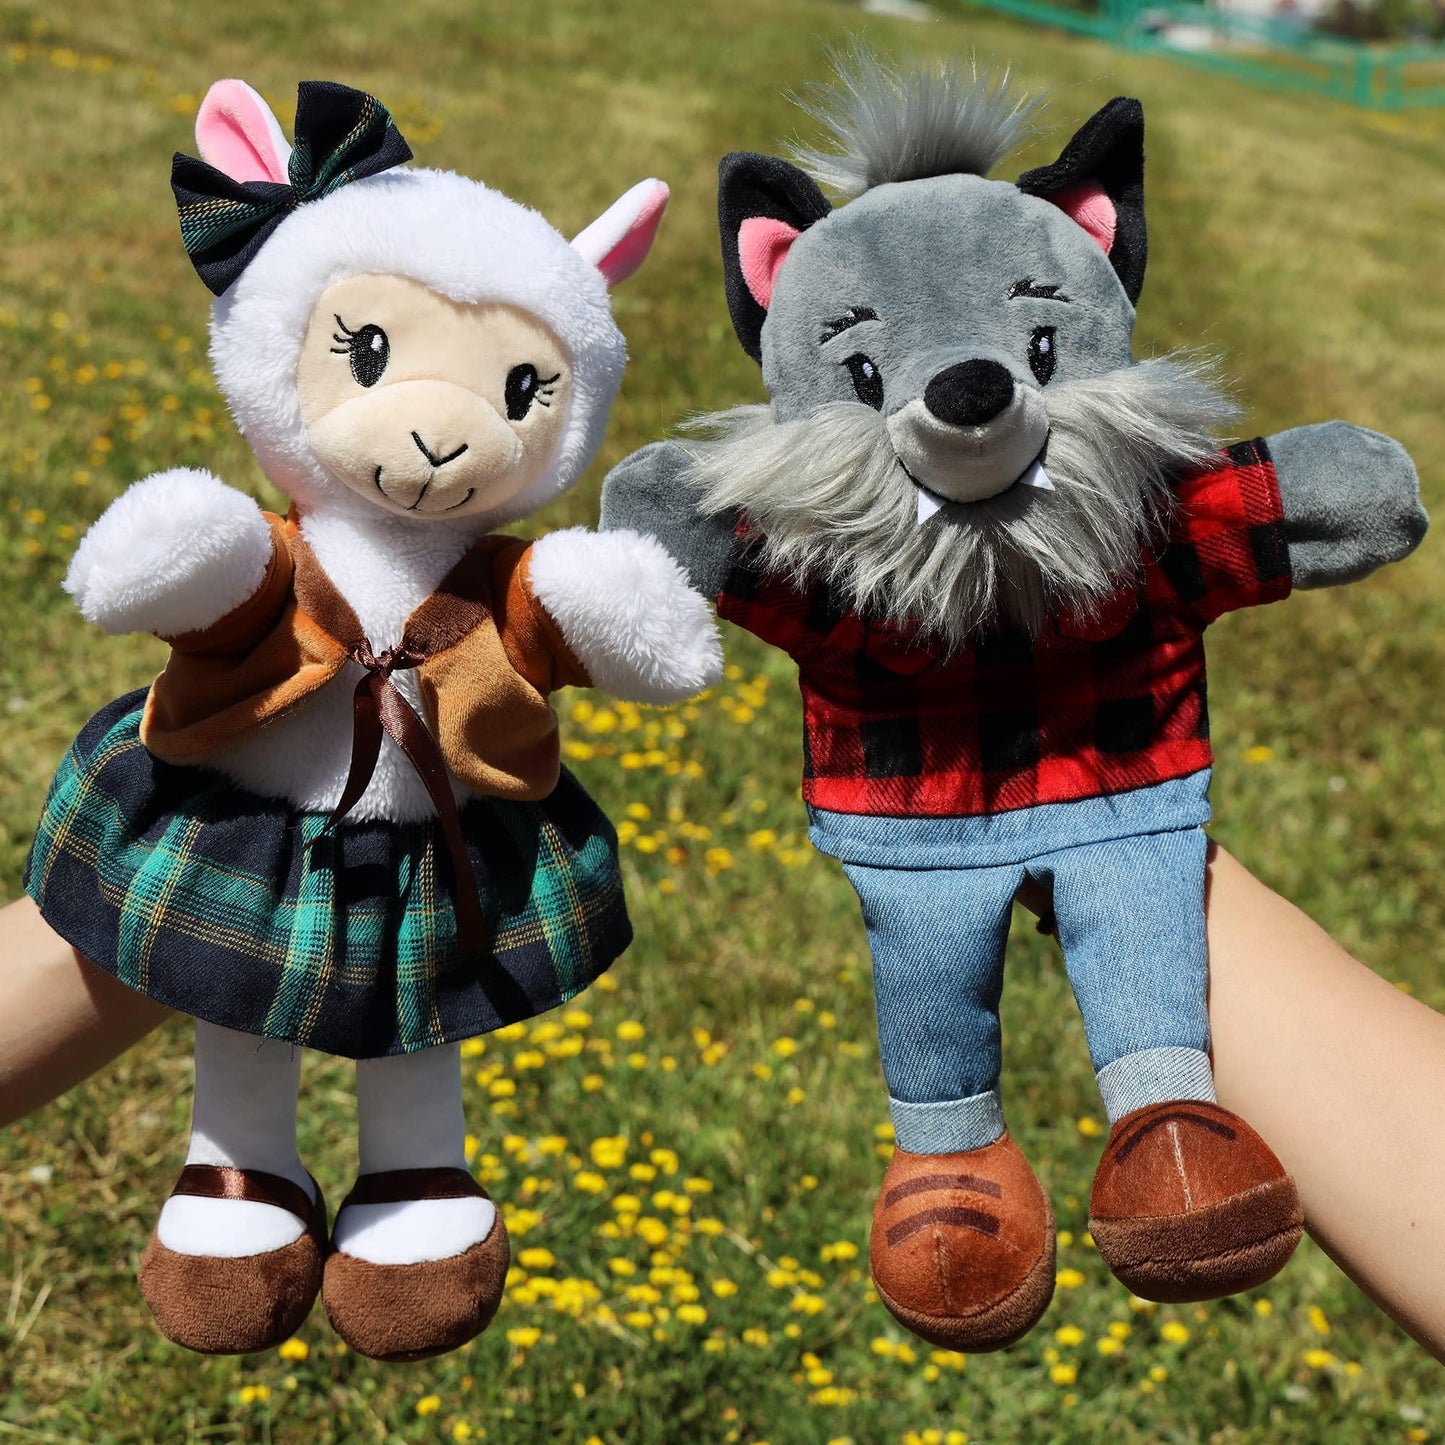 Plushible Animal Hand Puppets Puppet for Kids Toddlers Babies Fits Small & Large Size Hands Teaching Therapy Theater Show Time Full Body Puppet with Legs Girl & Boy Plush Toy Wolf - Loomini